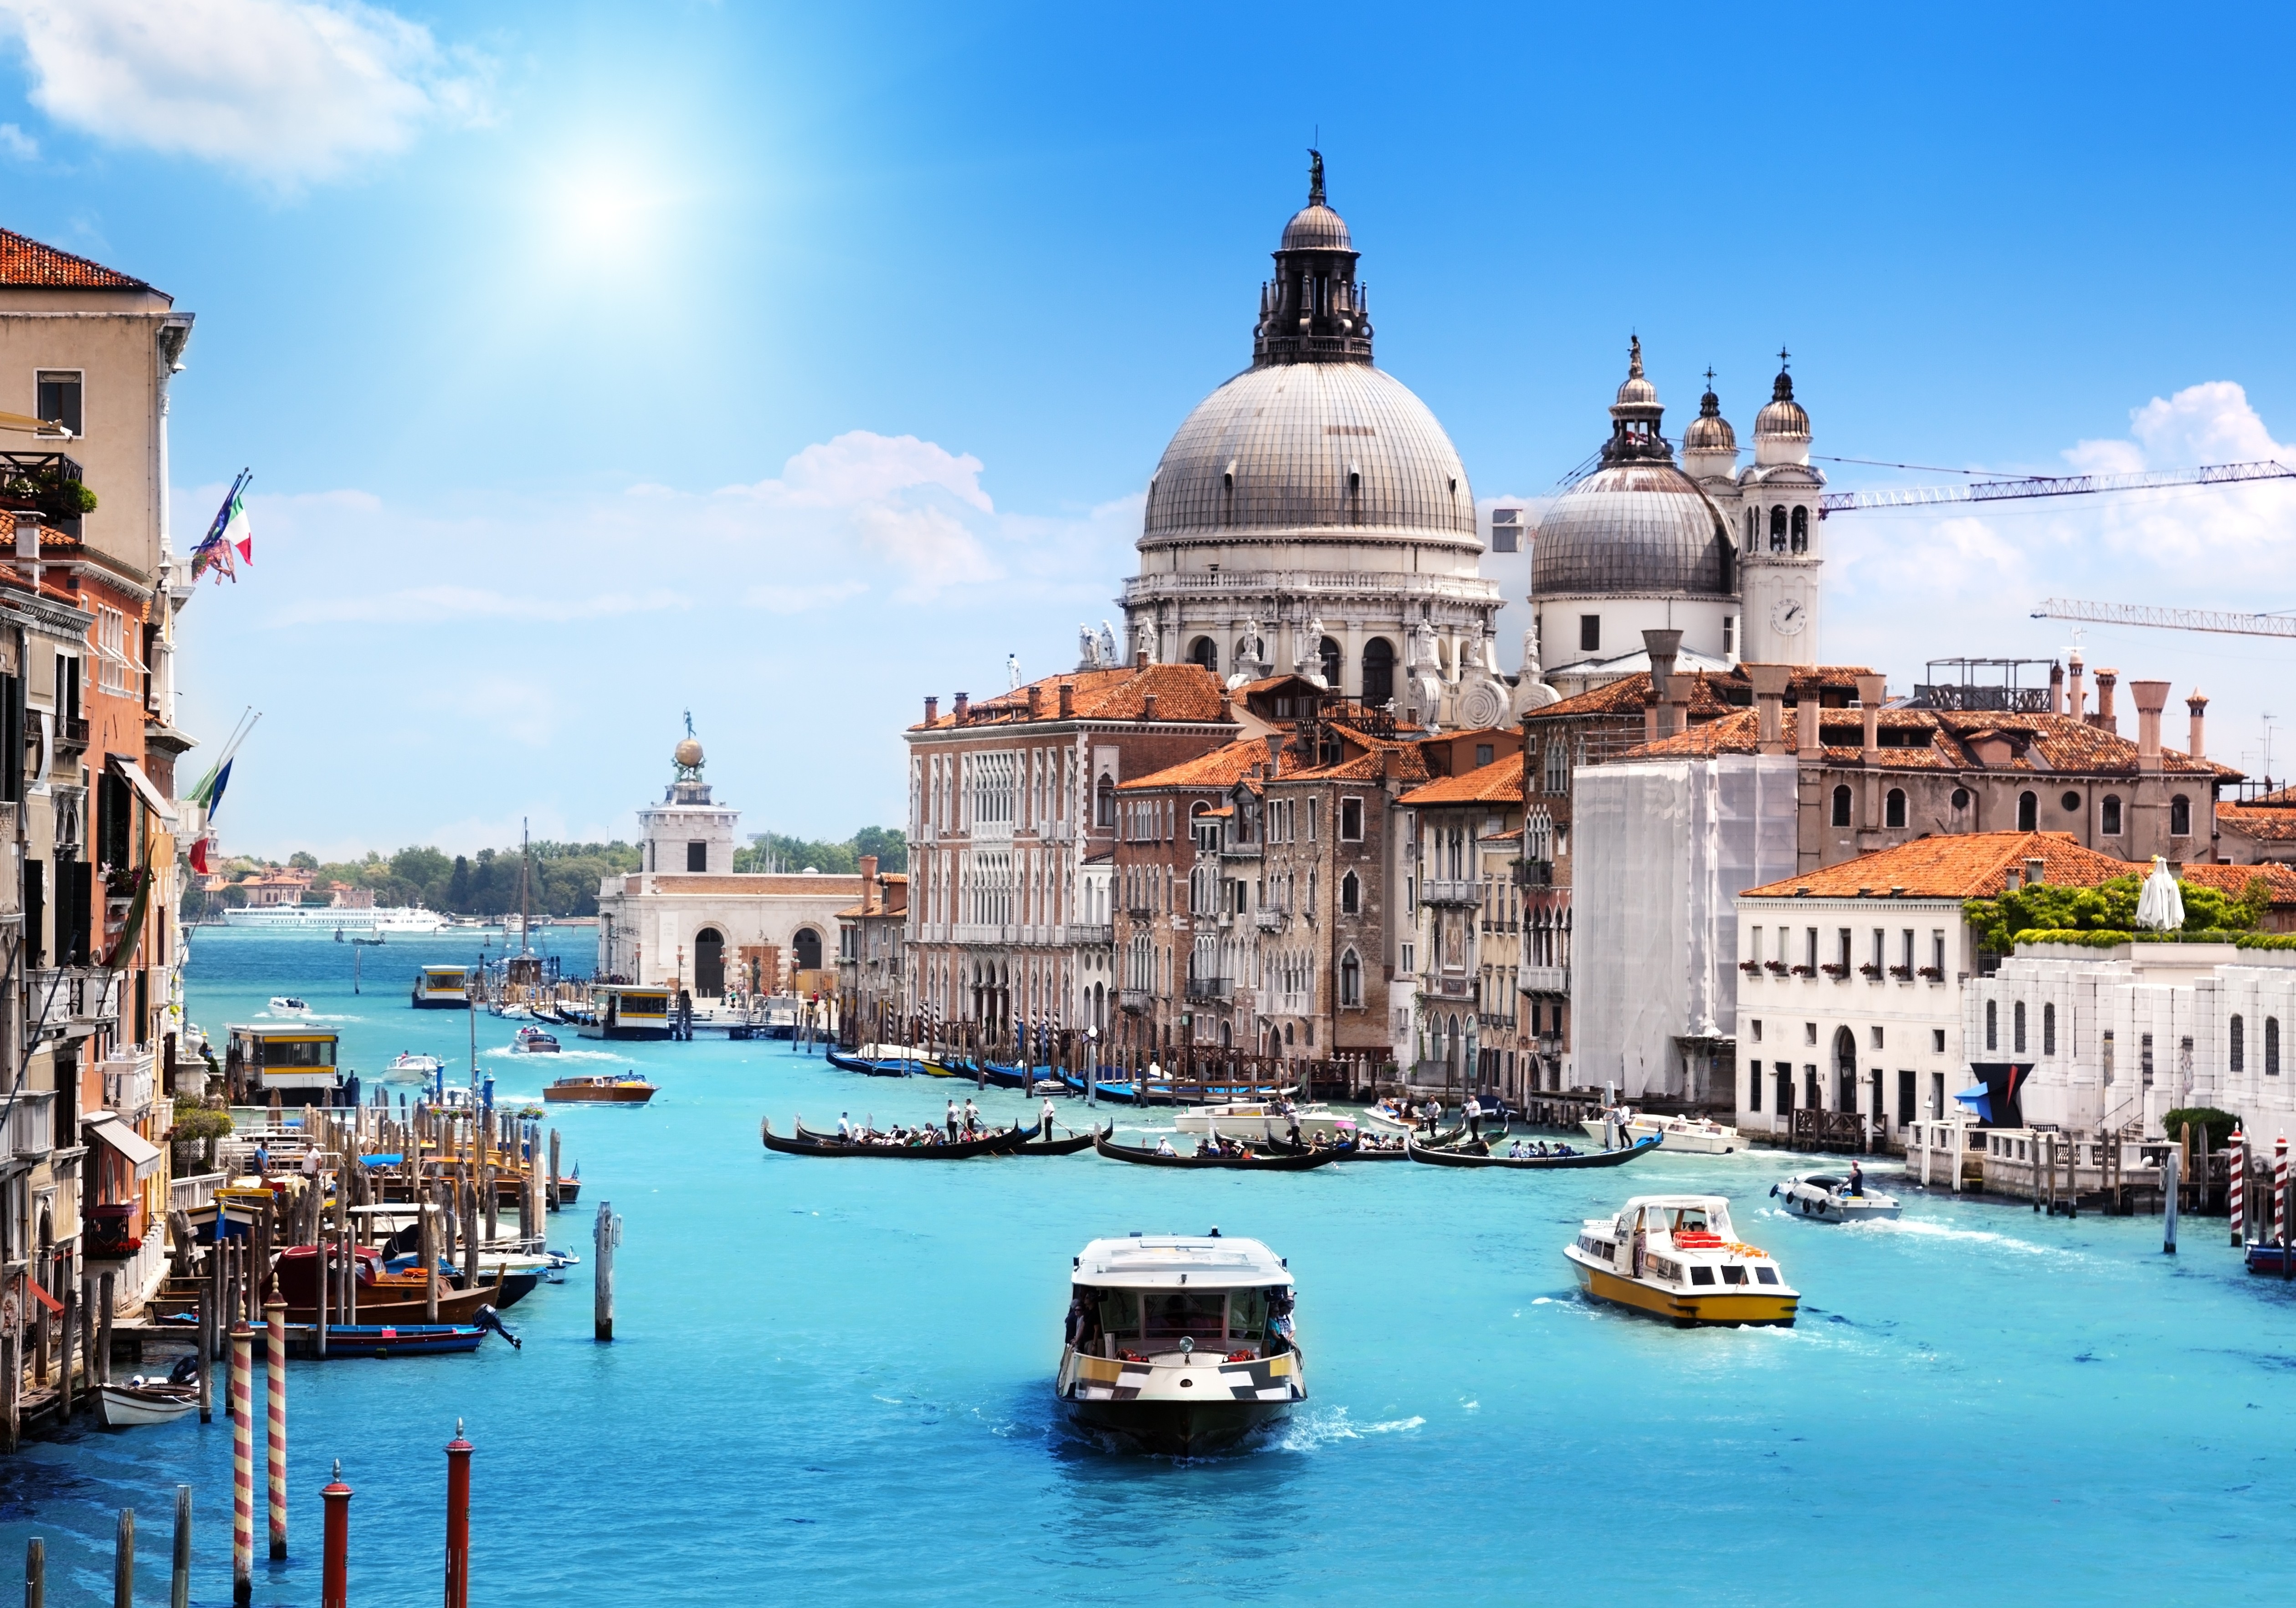 General 5040x3530 Venice Italy city canal building landscape boat house water Grand Canal vehicle cityscape